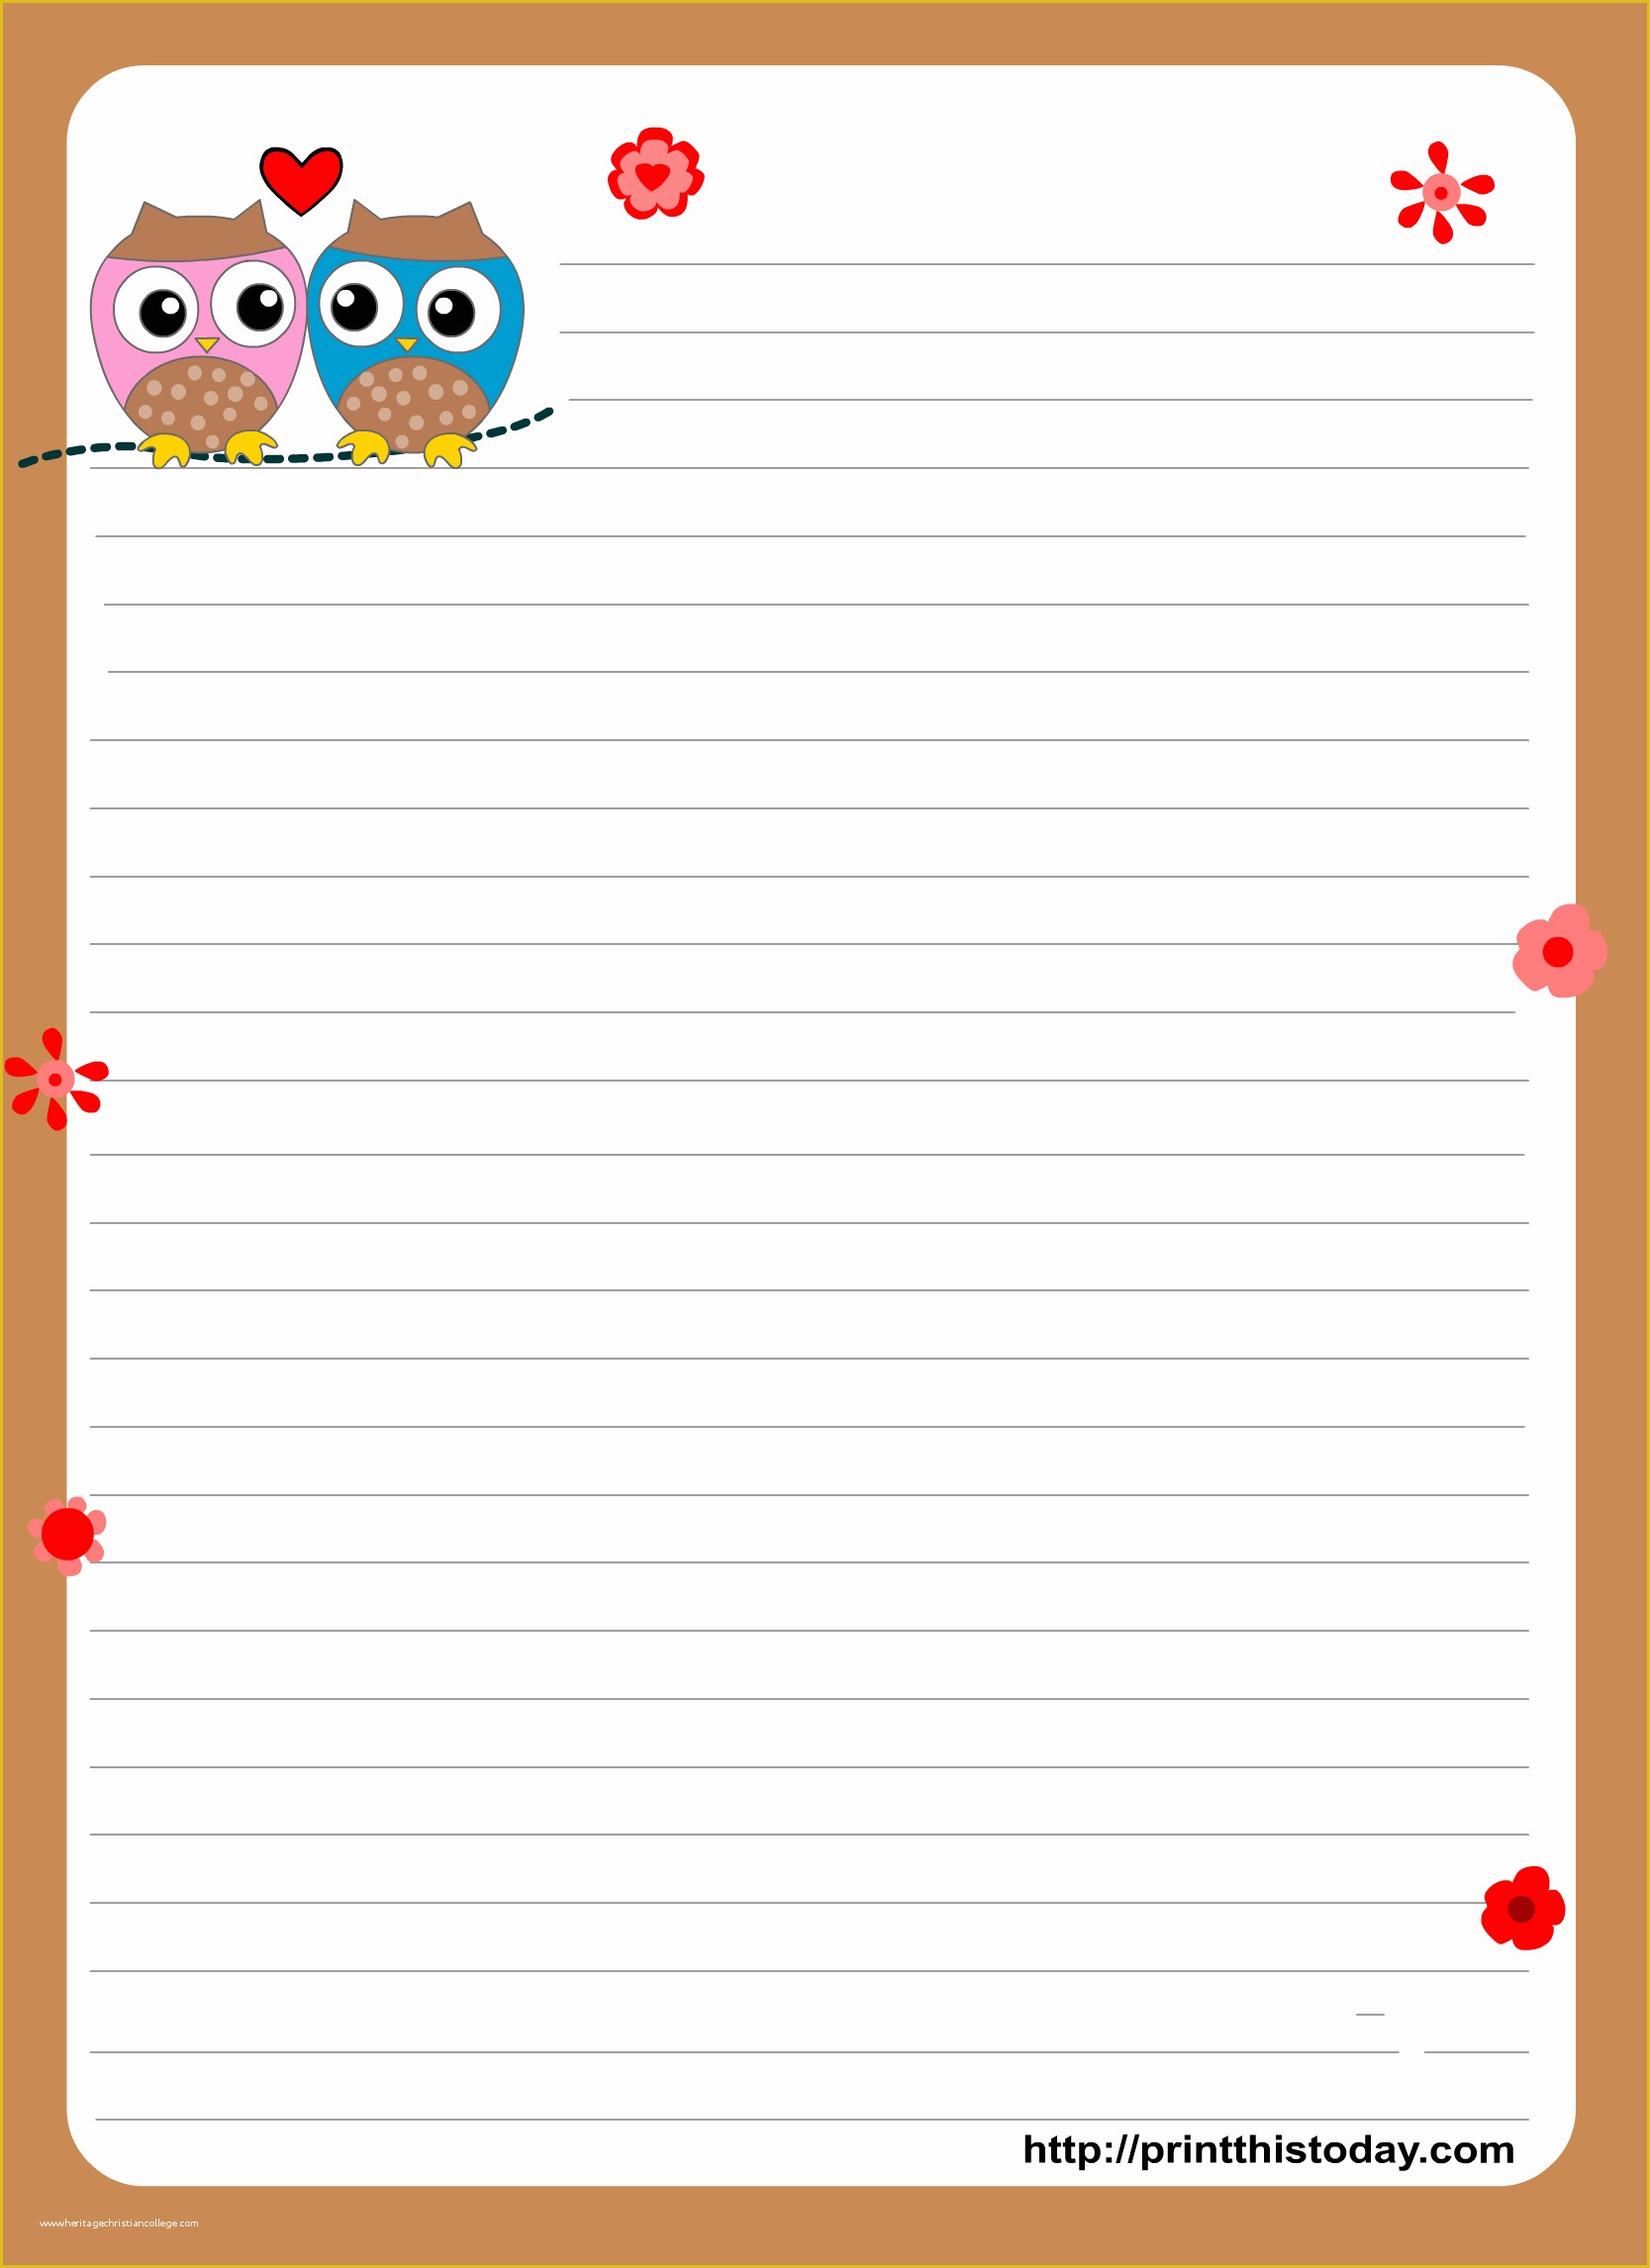 Free Printable Stationery Templates Of This Cute Stationery Paper Is 